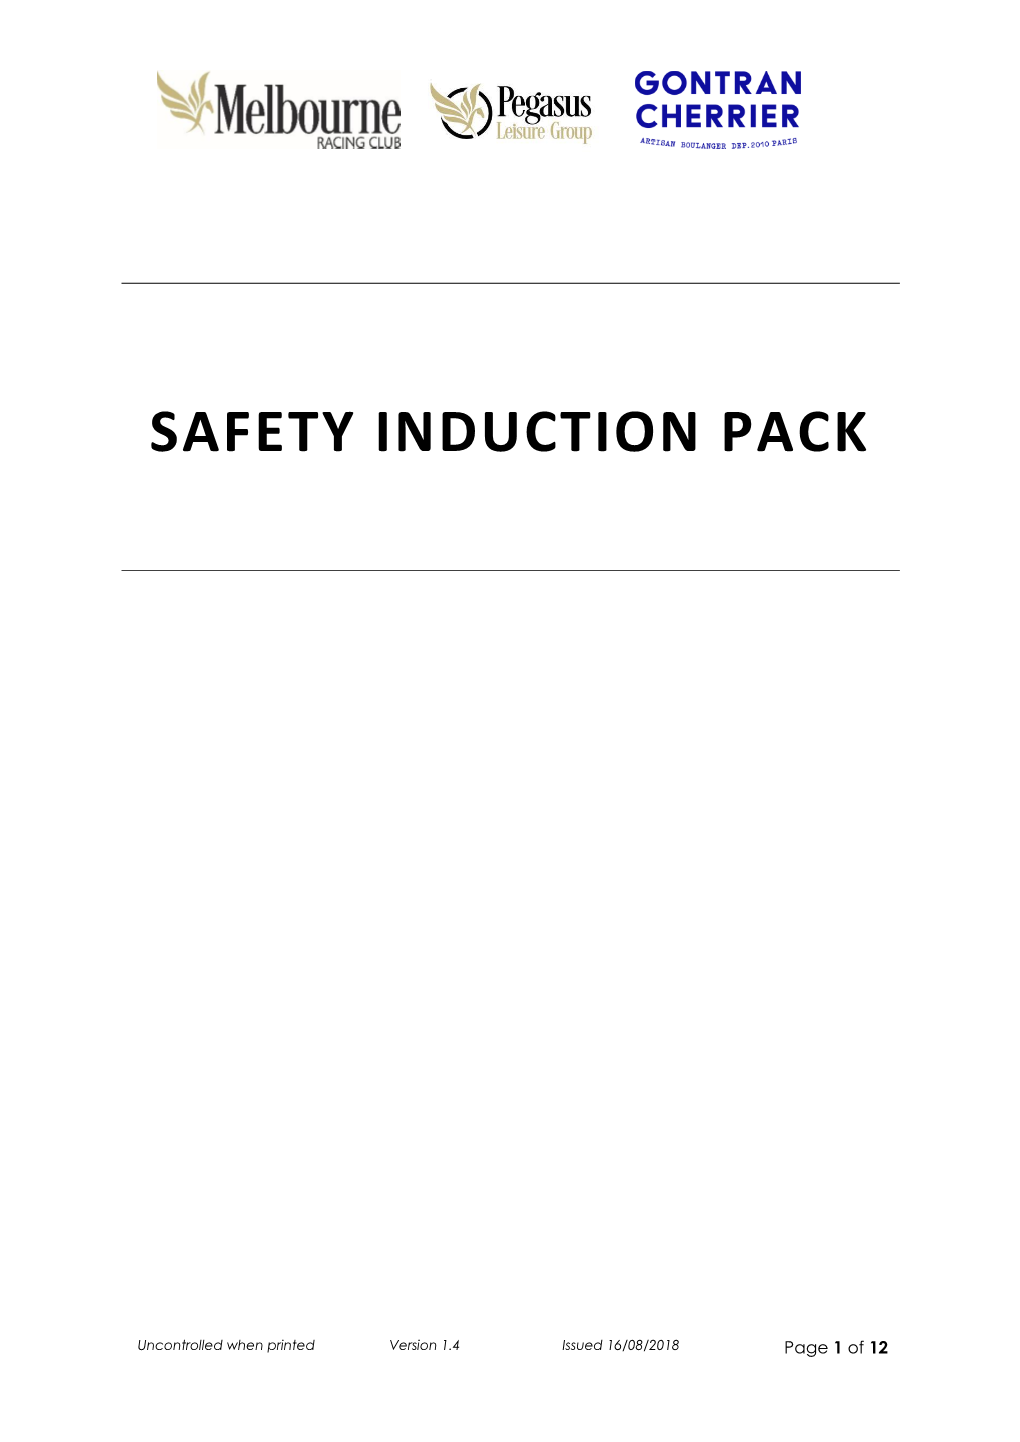 Safety Induction Pack